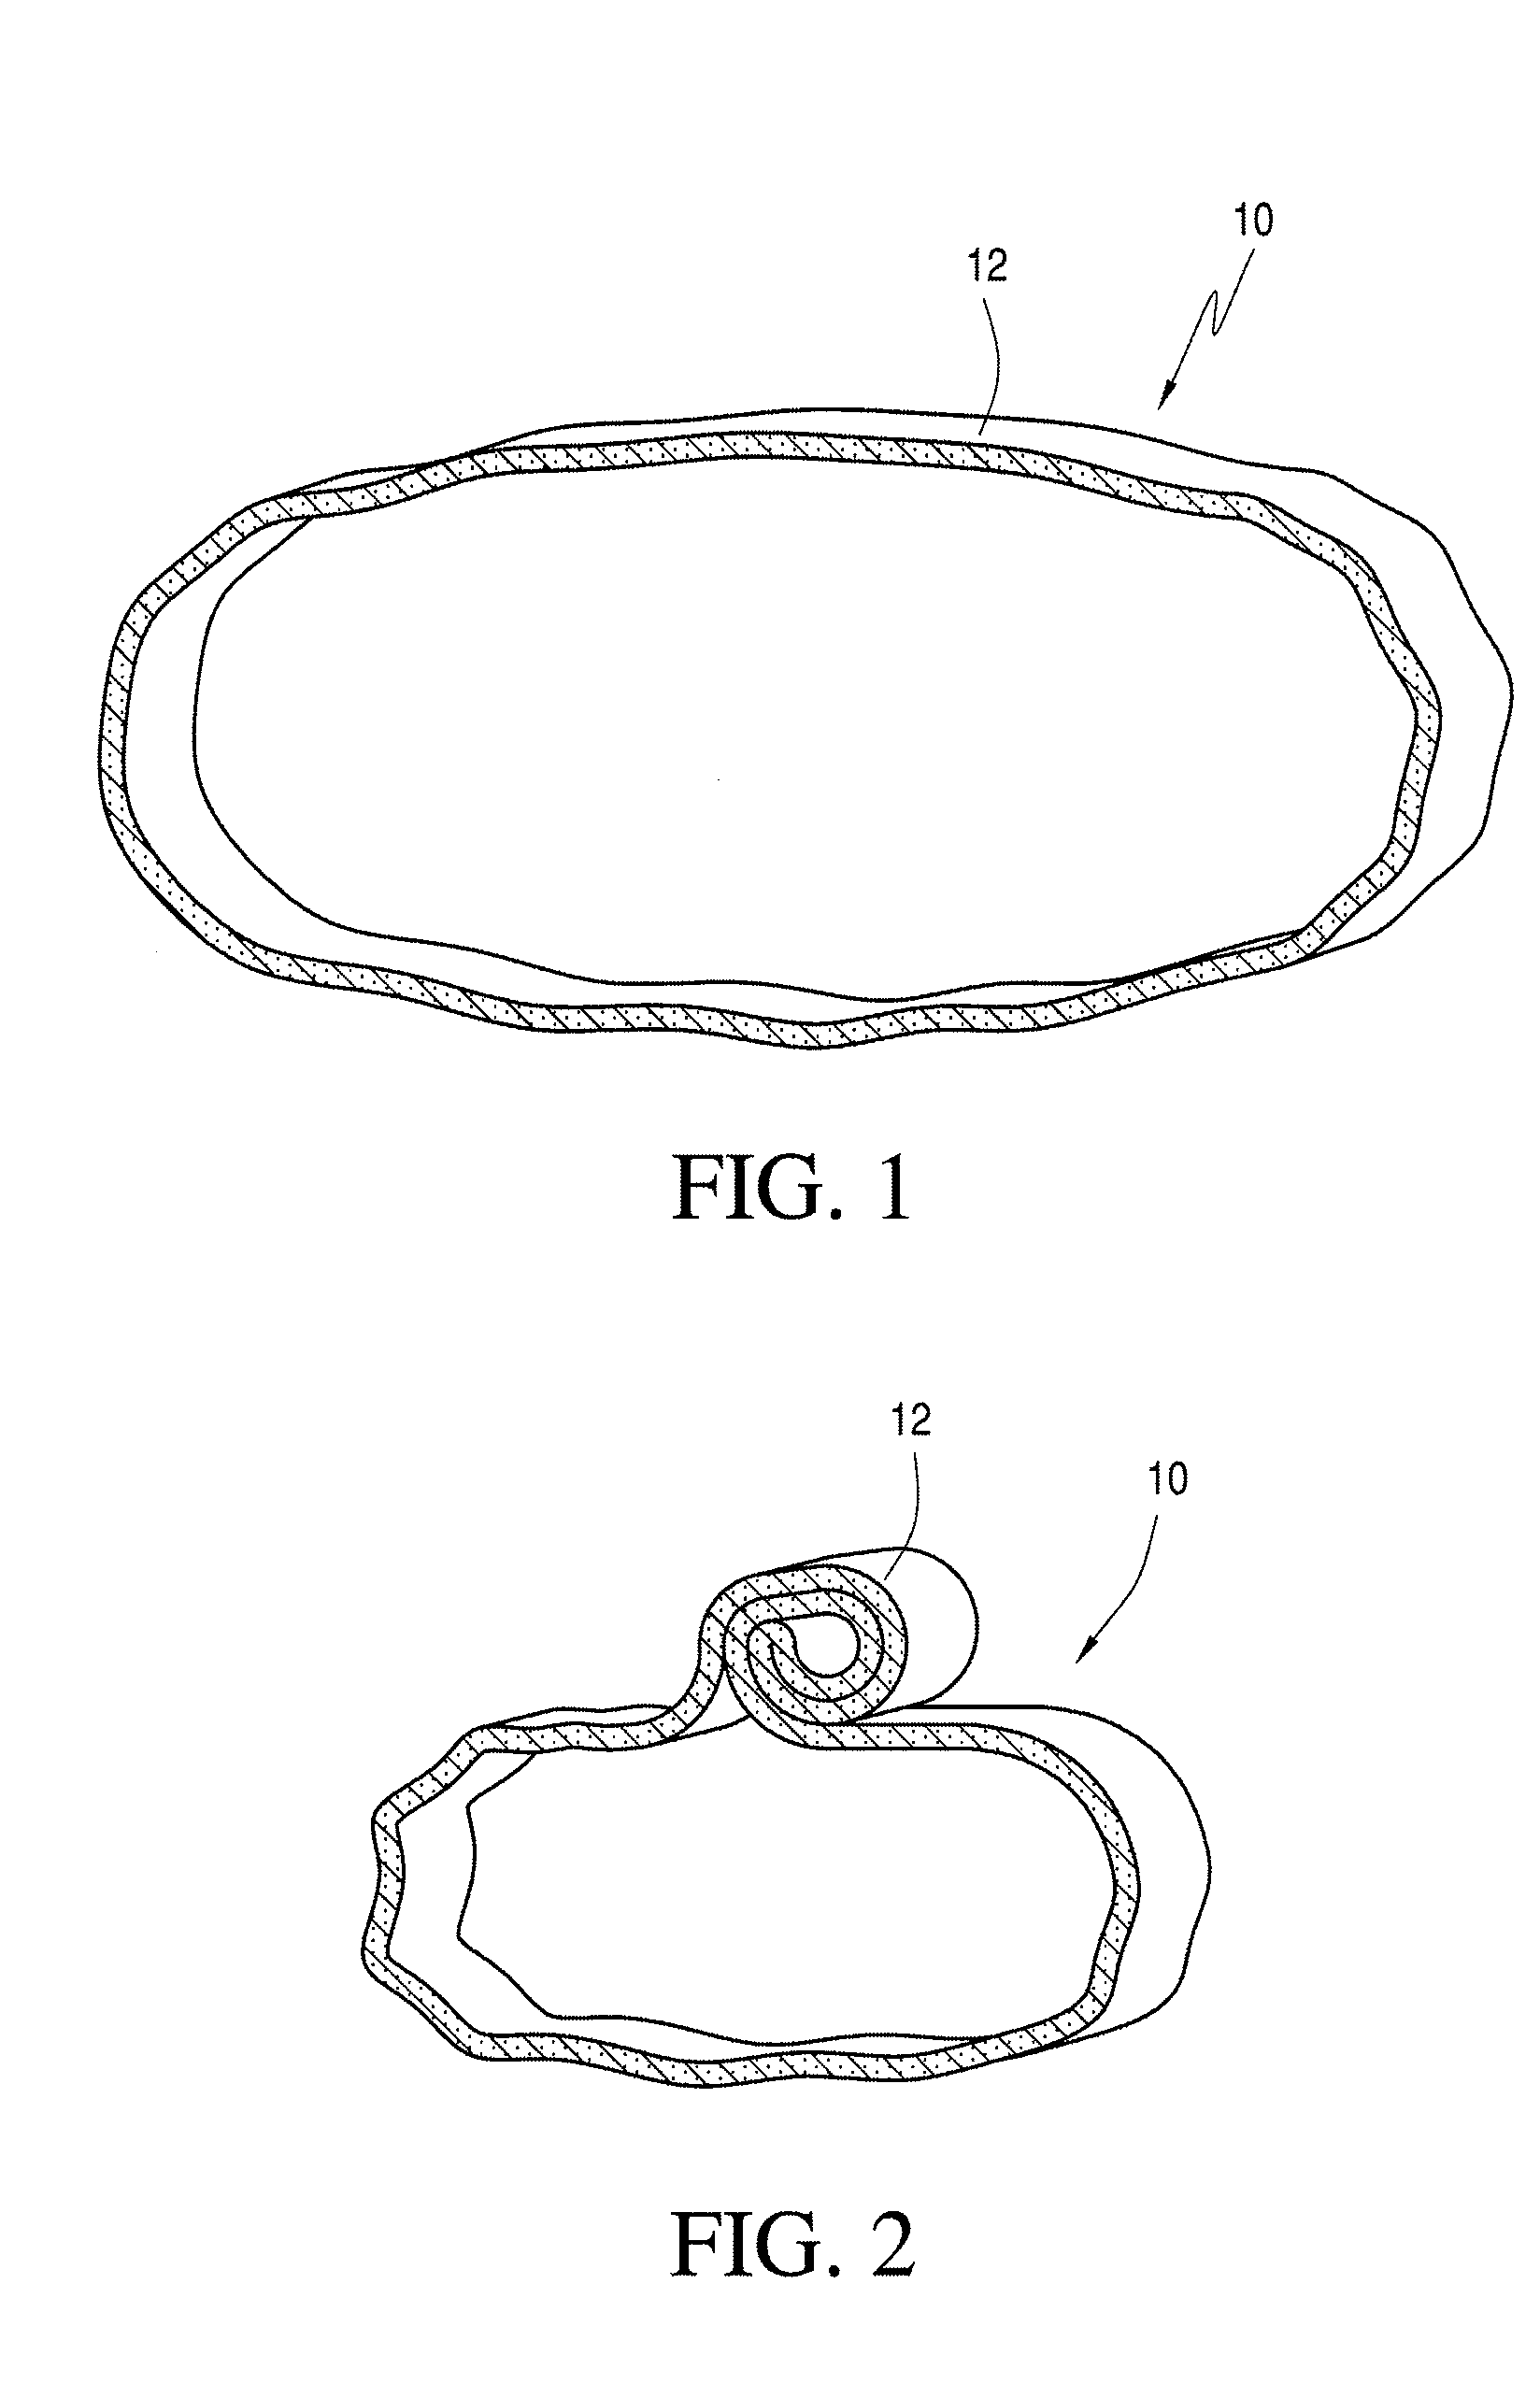 Method of rolling stomach tissue so as to maximize the contact surface area of a fold